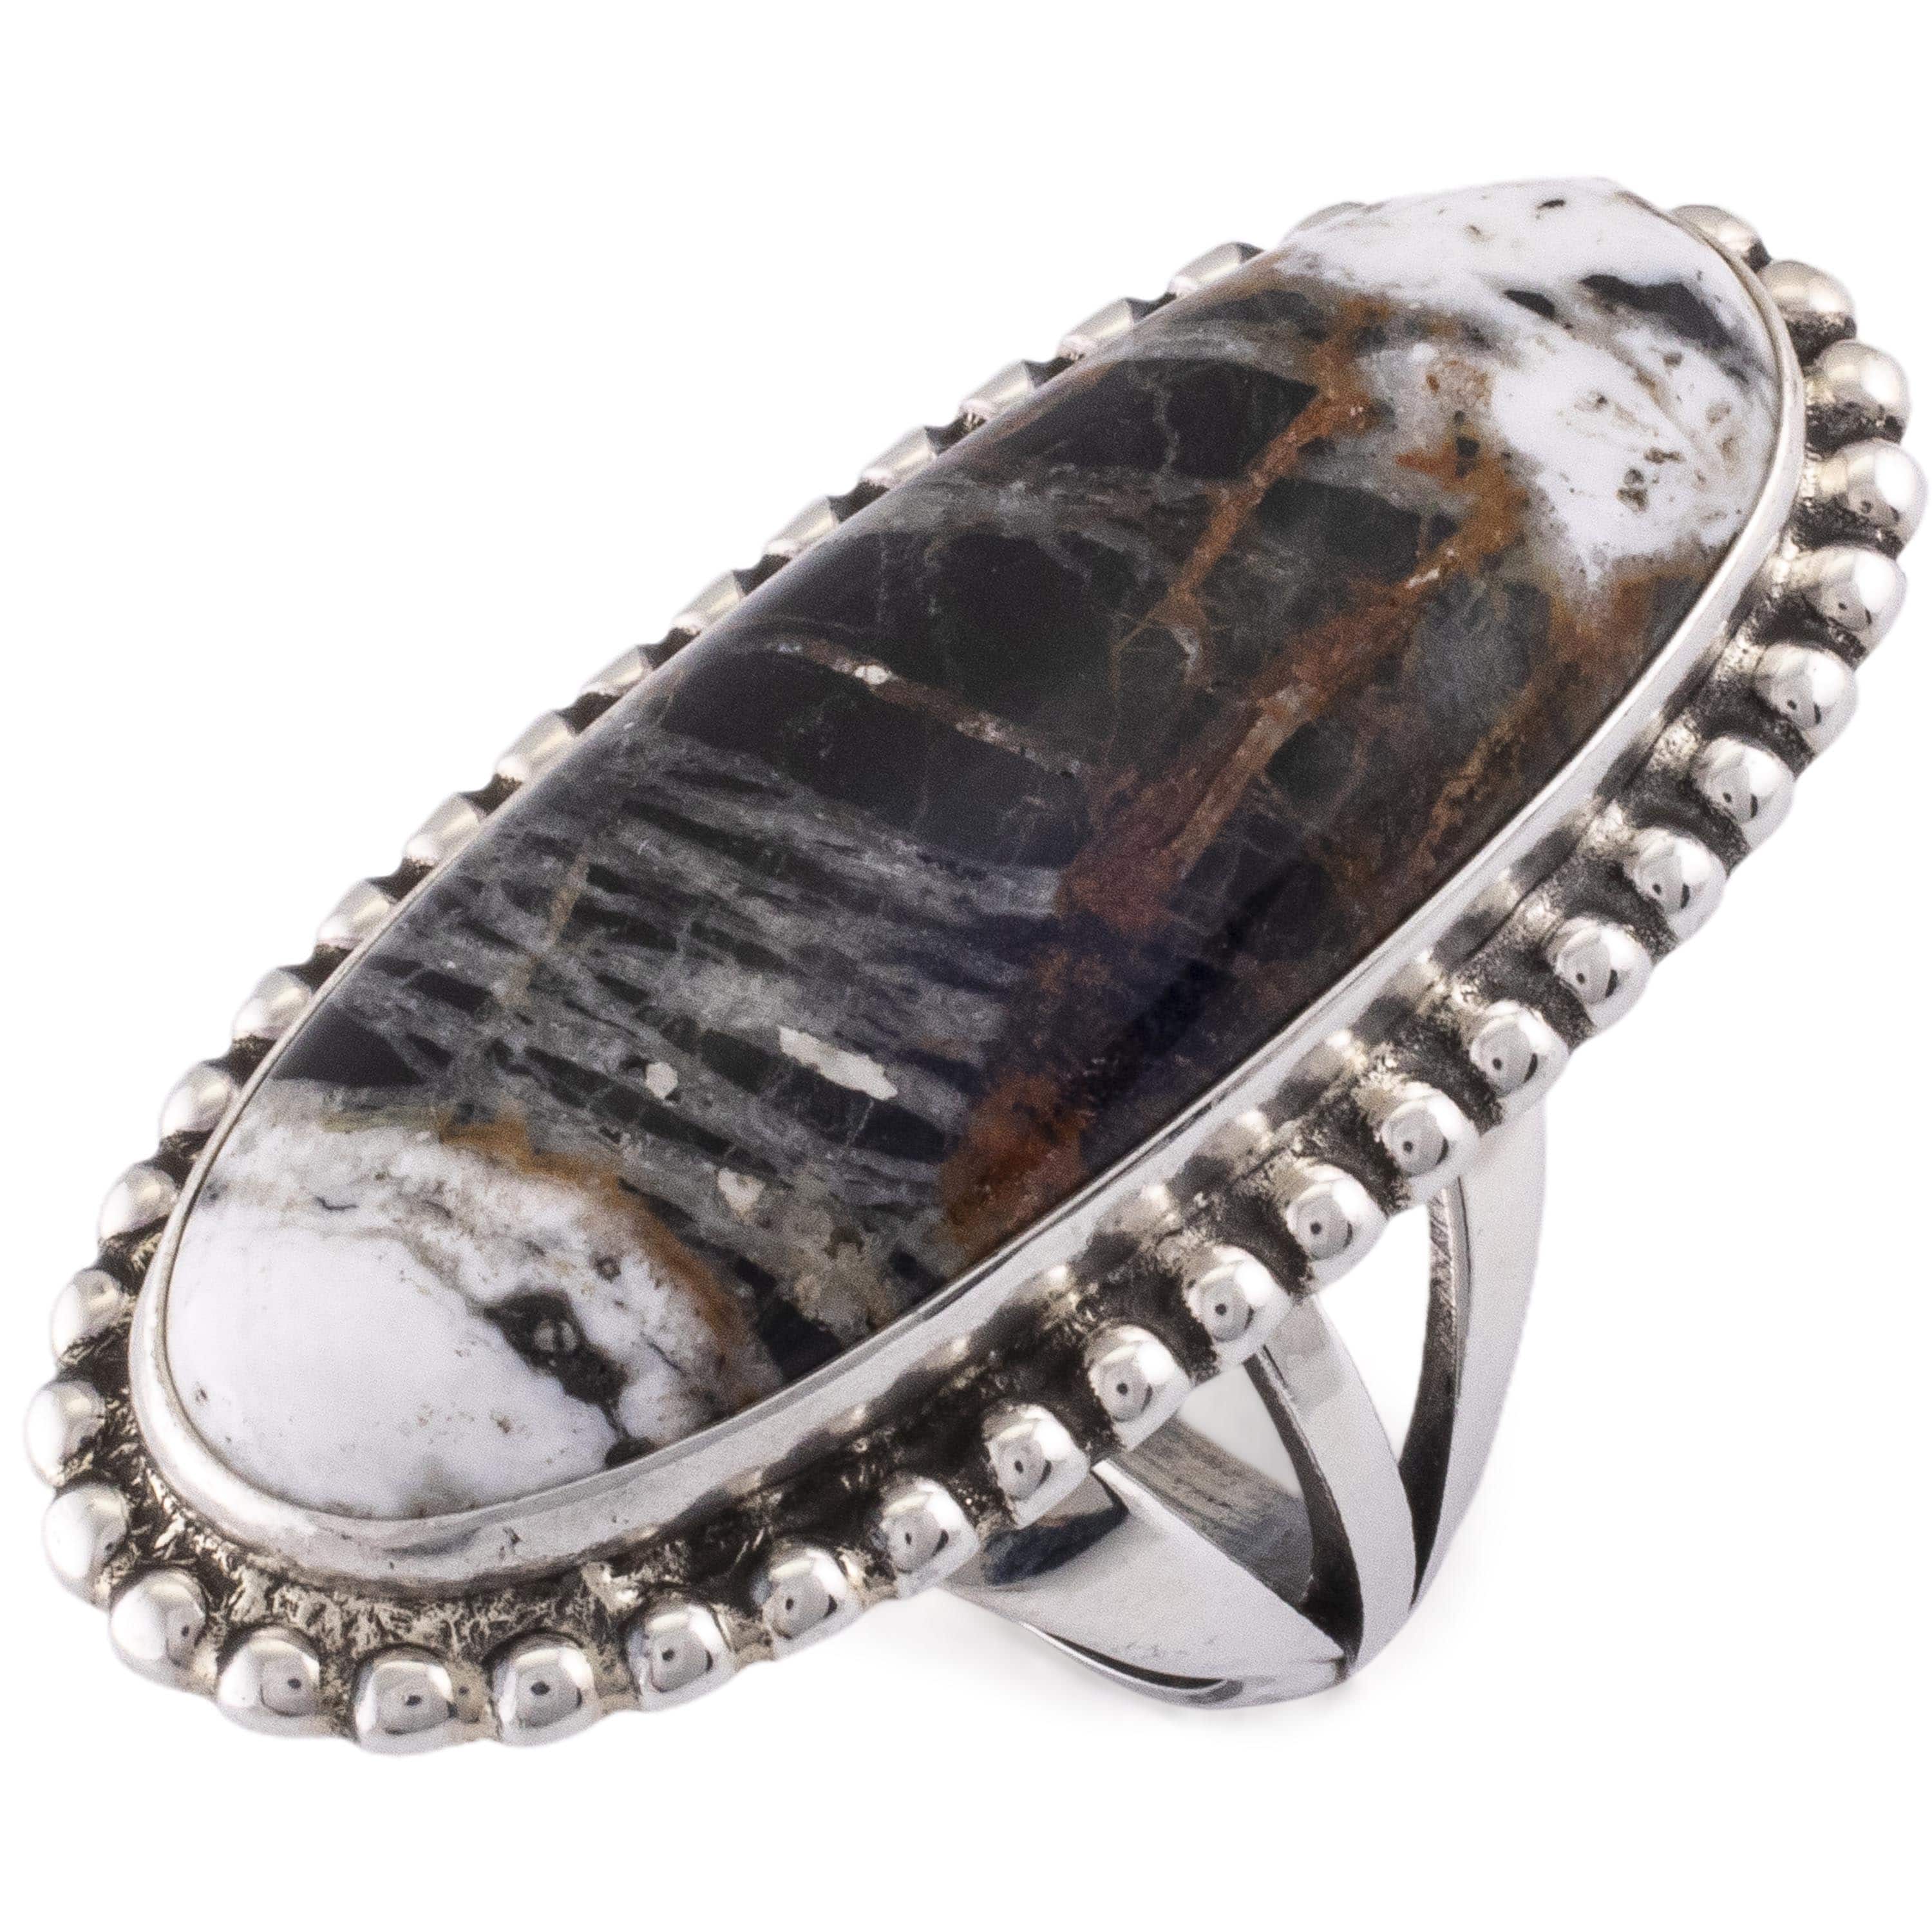 Kalifano Native American Jewelry 8 Eddie Secatero Navajo White Buffalo Turquoise USA Native American Made 925 Sterling Silver Ring NAR900.025.8